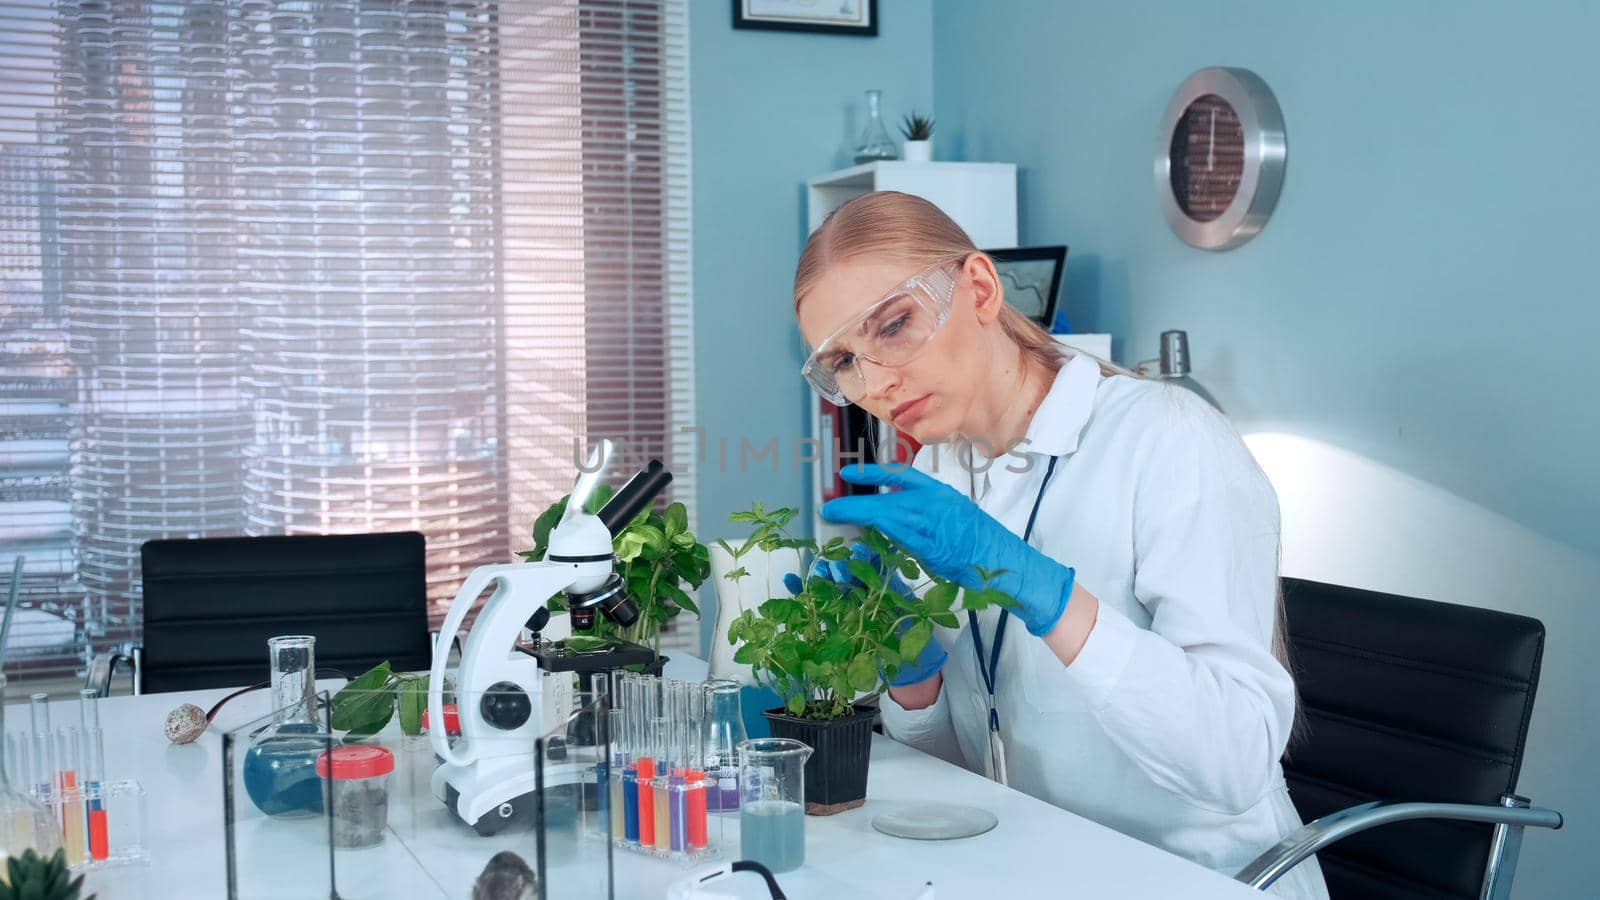 In modern lab research scientist examining the plant in pot with surgical pincers by art24pro